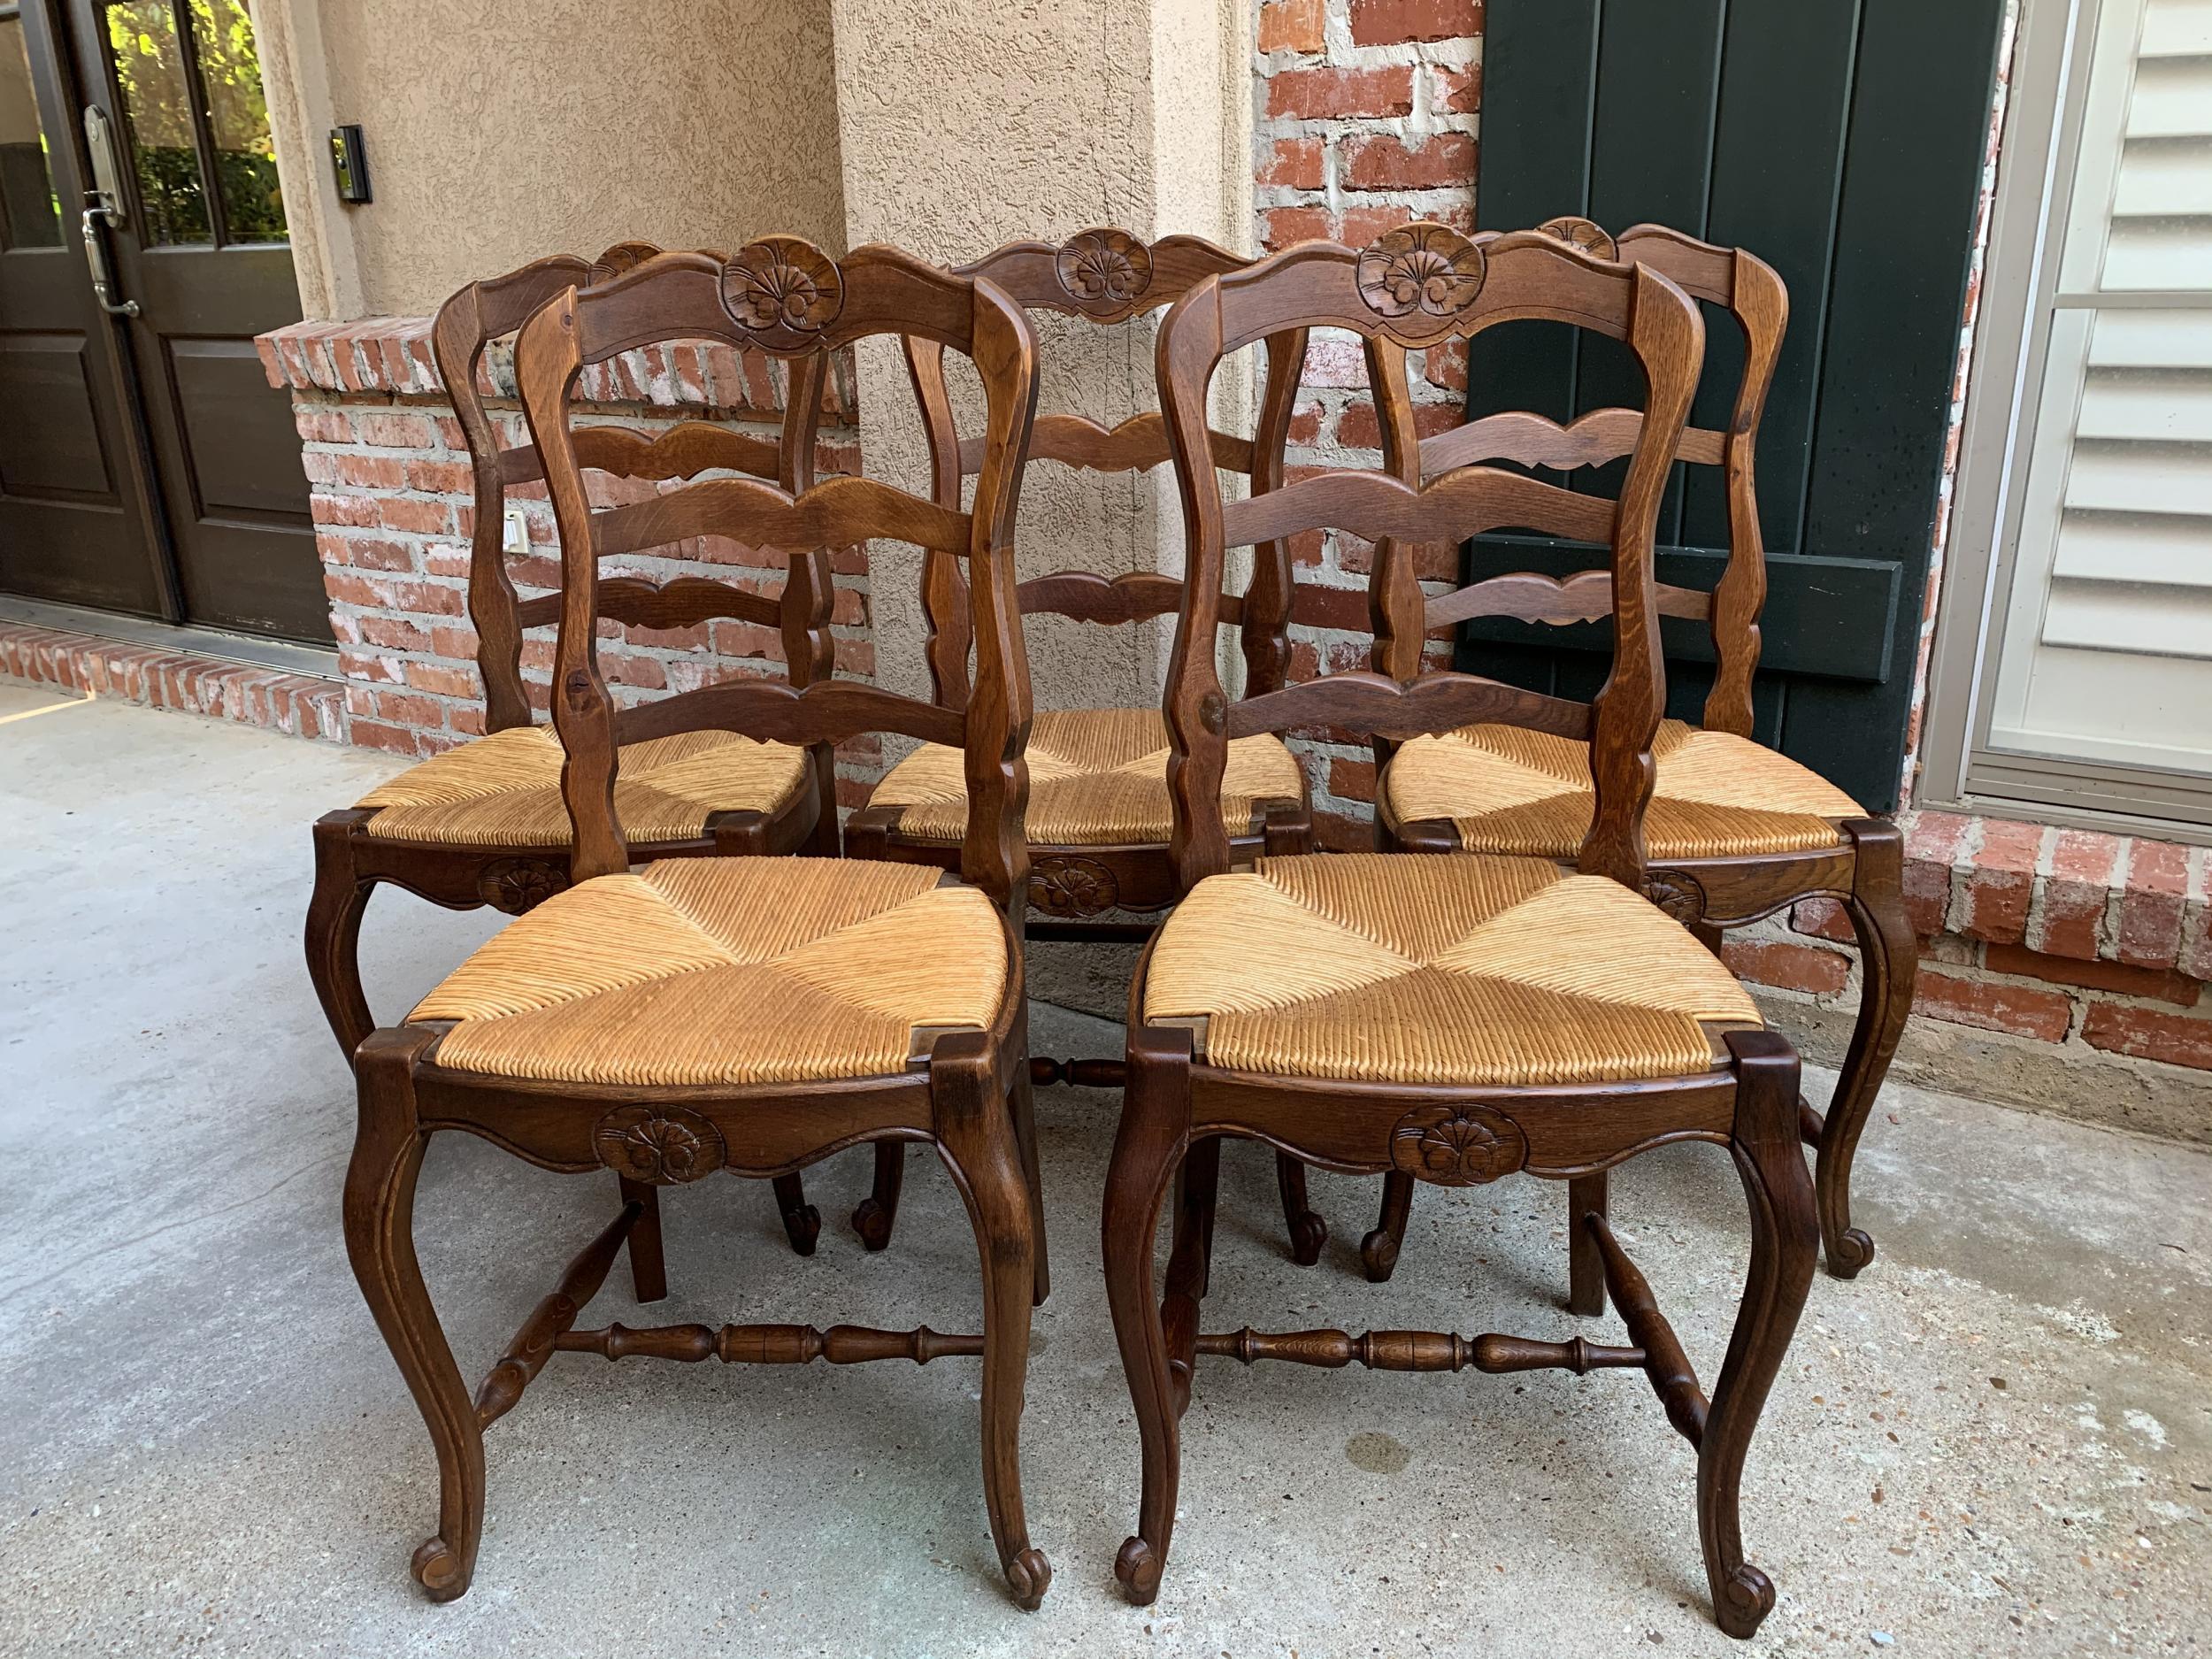 ~Direct from France~
~Lovely set of 5 antique French chairs, with classic French style… perfect for a kitchen or dining room with their original finish that compliments any decor!~
~Serpentine ladder backs with a lovely silhouette; rail has a